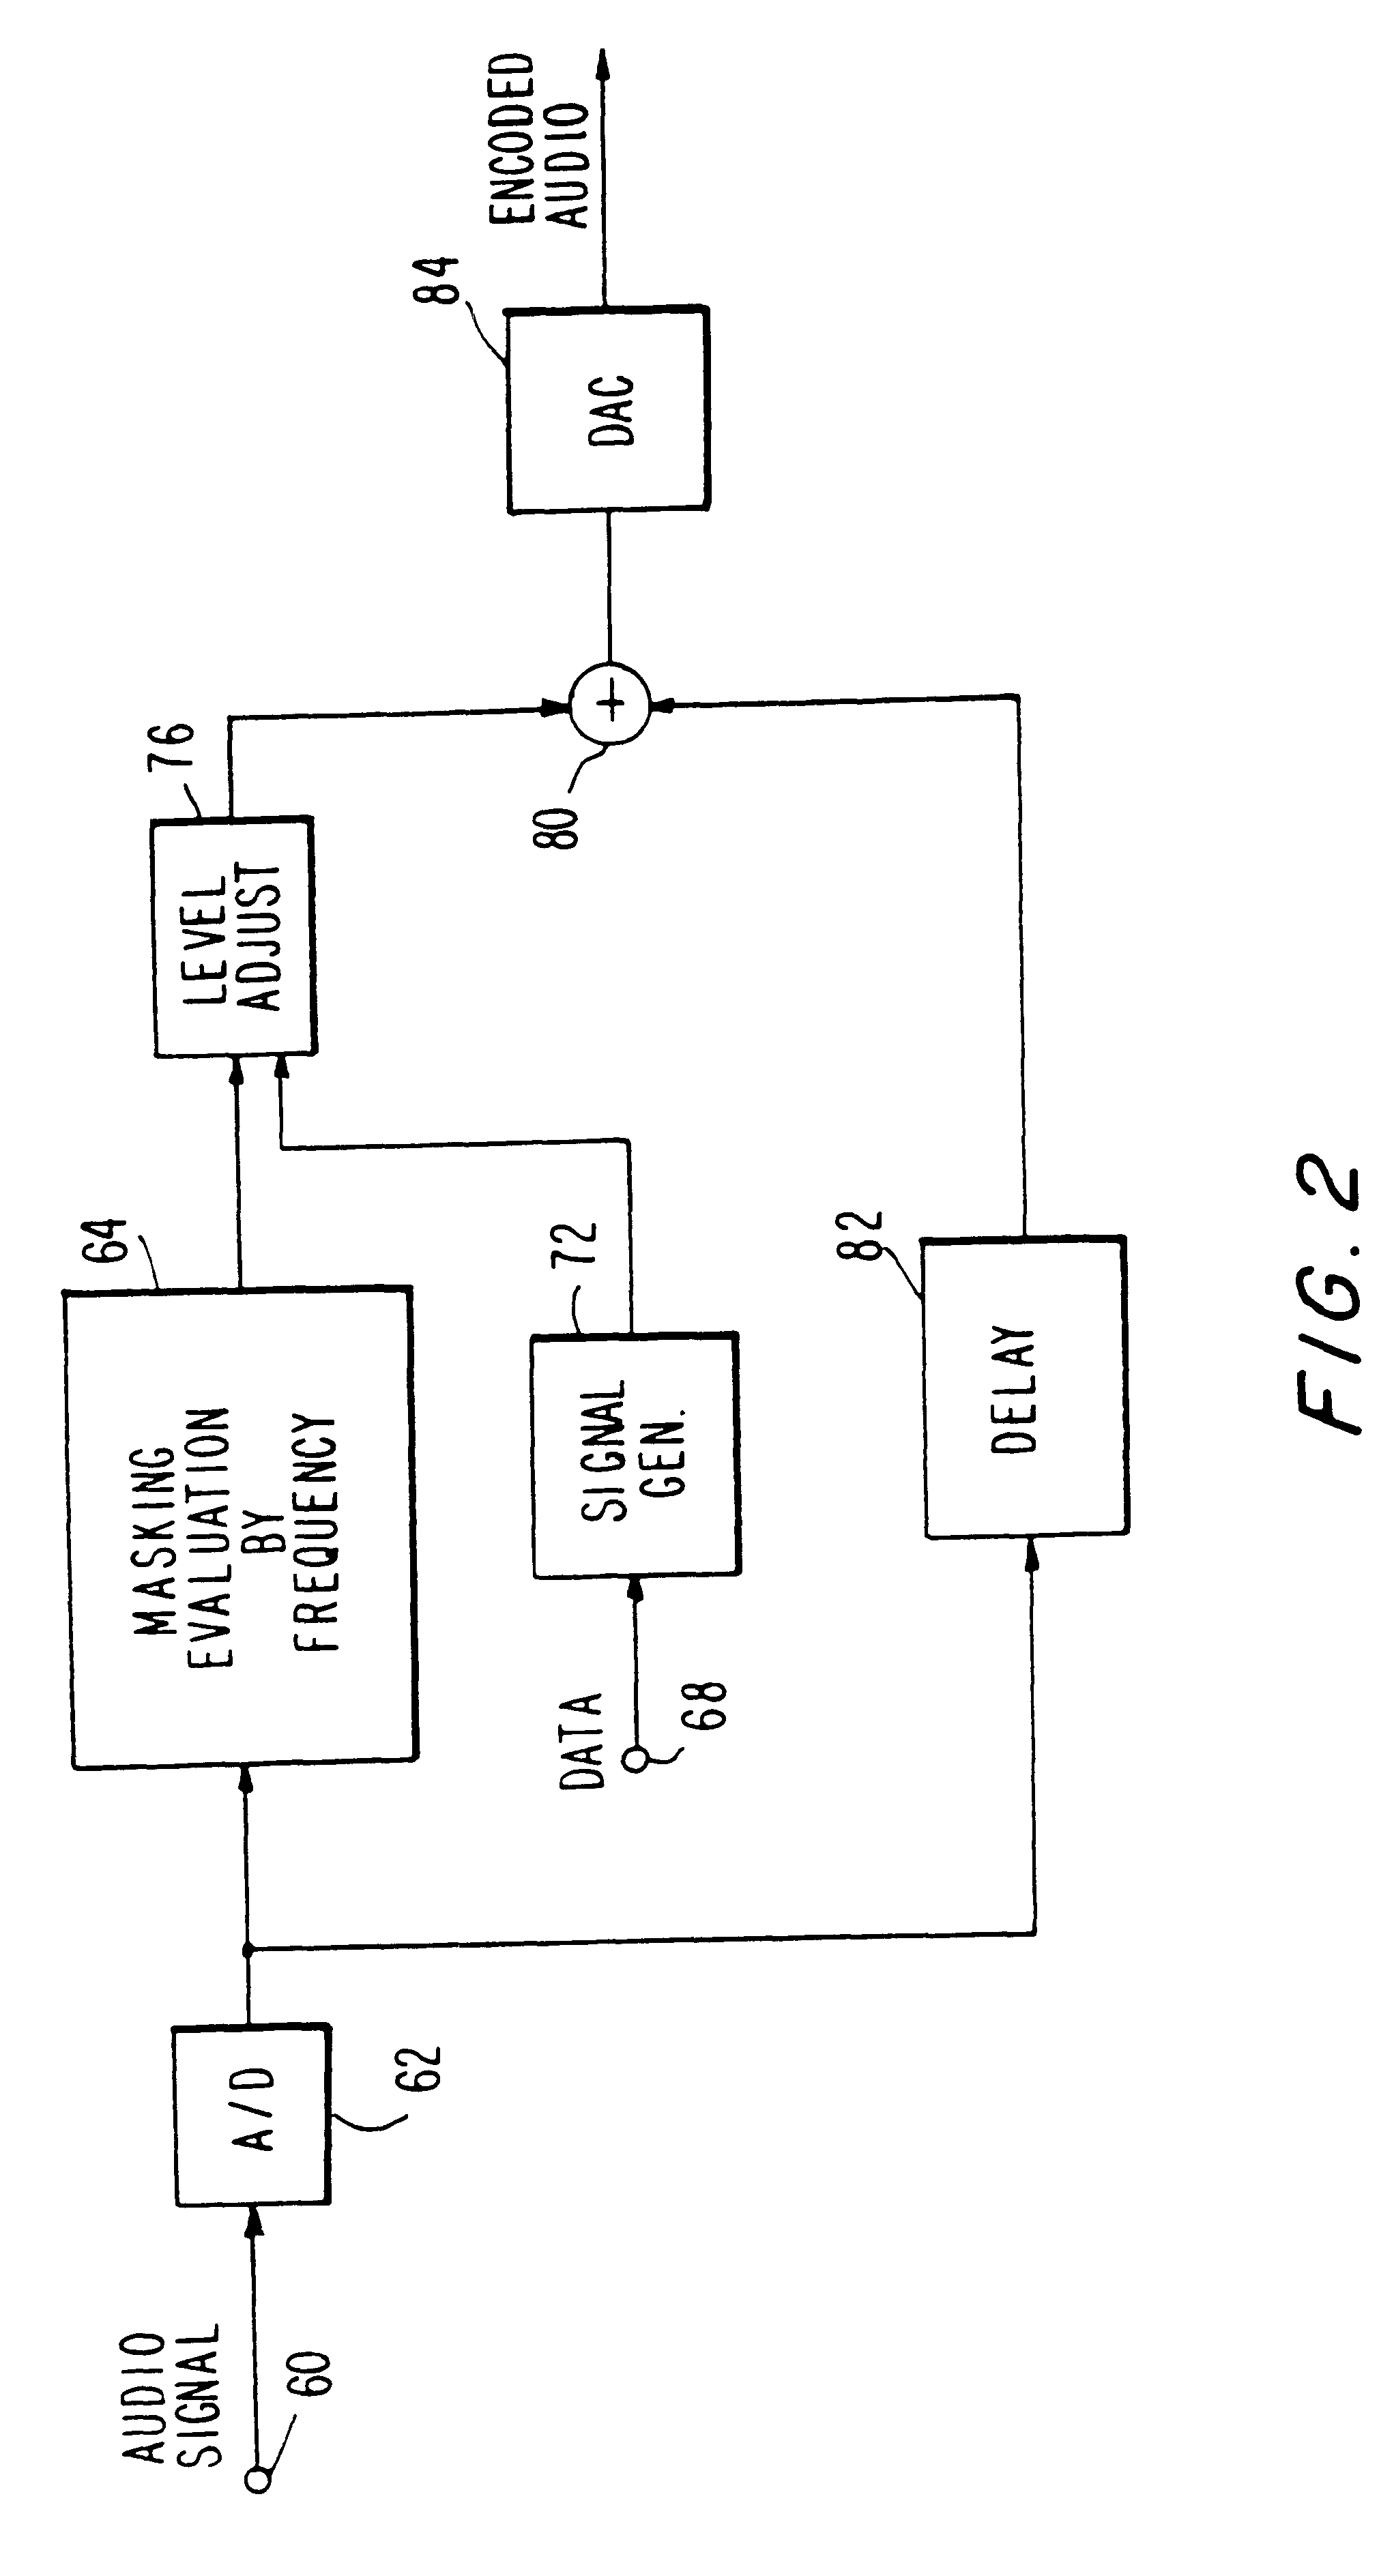 Apparatus and methods for including codes in audio signals